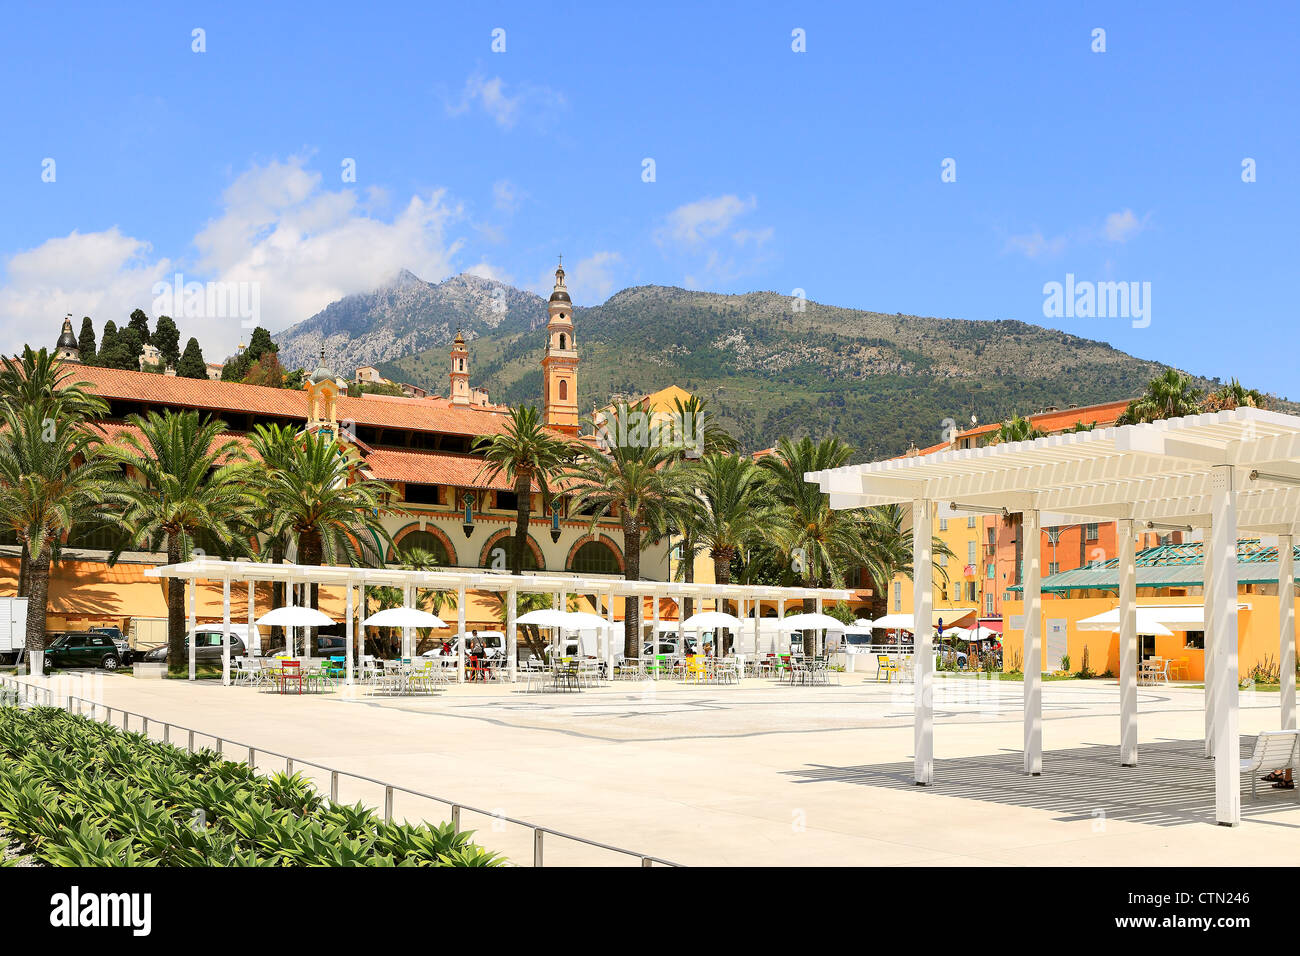 View on central plaza and old town of Menton on French Riviera in France. Stock Photo